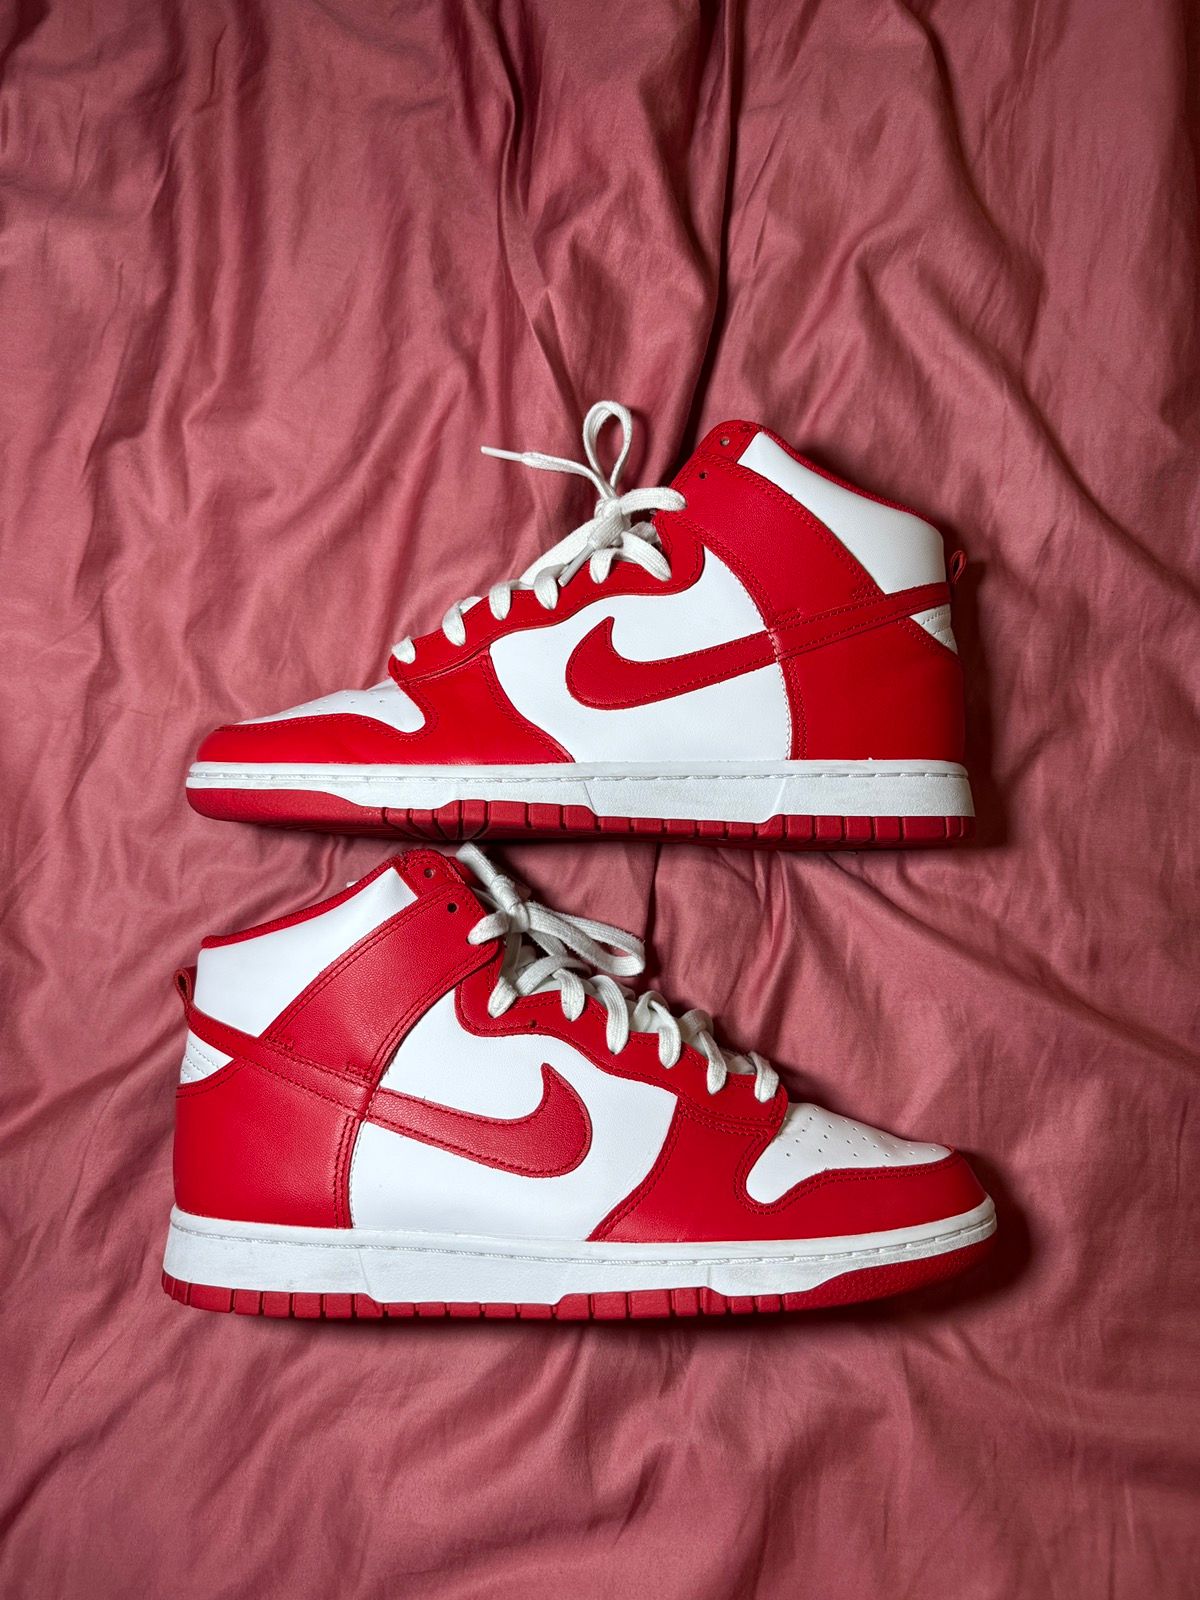 Pre-owned Nike Dunk High Championship White Red Shoes